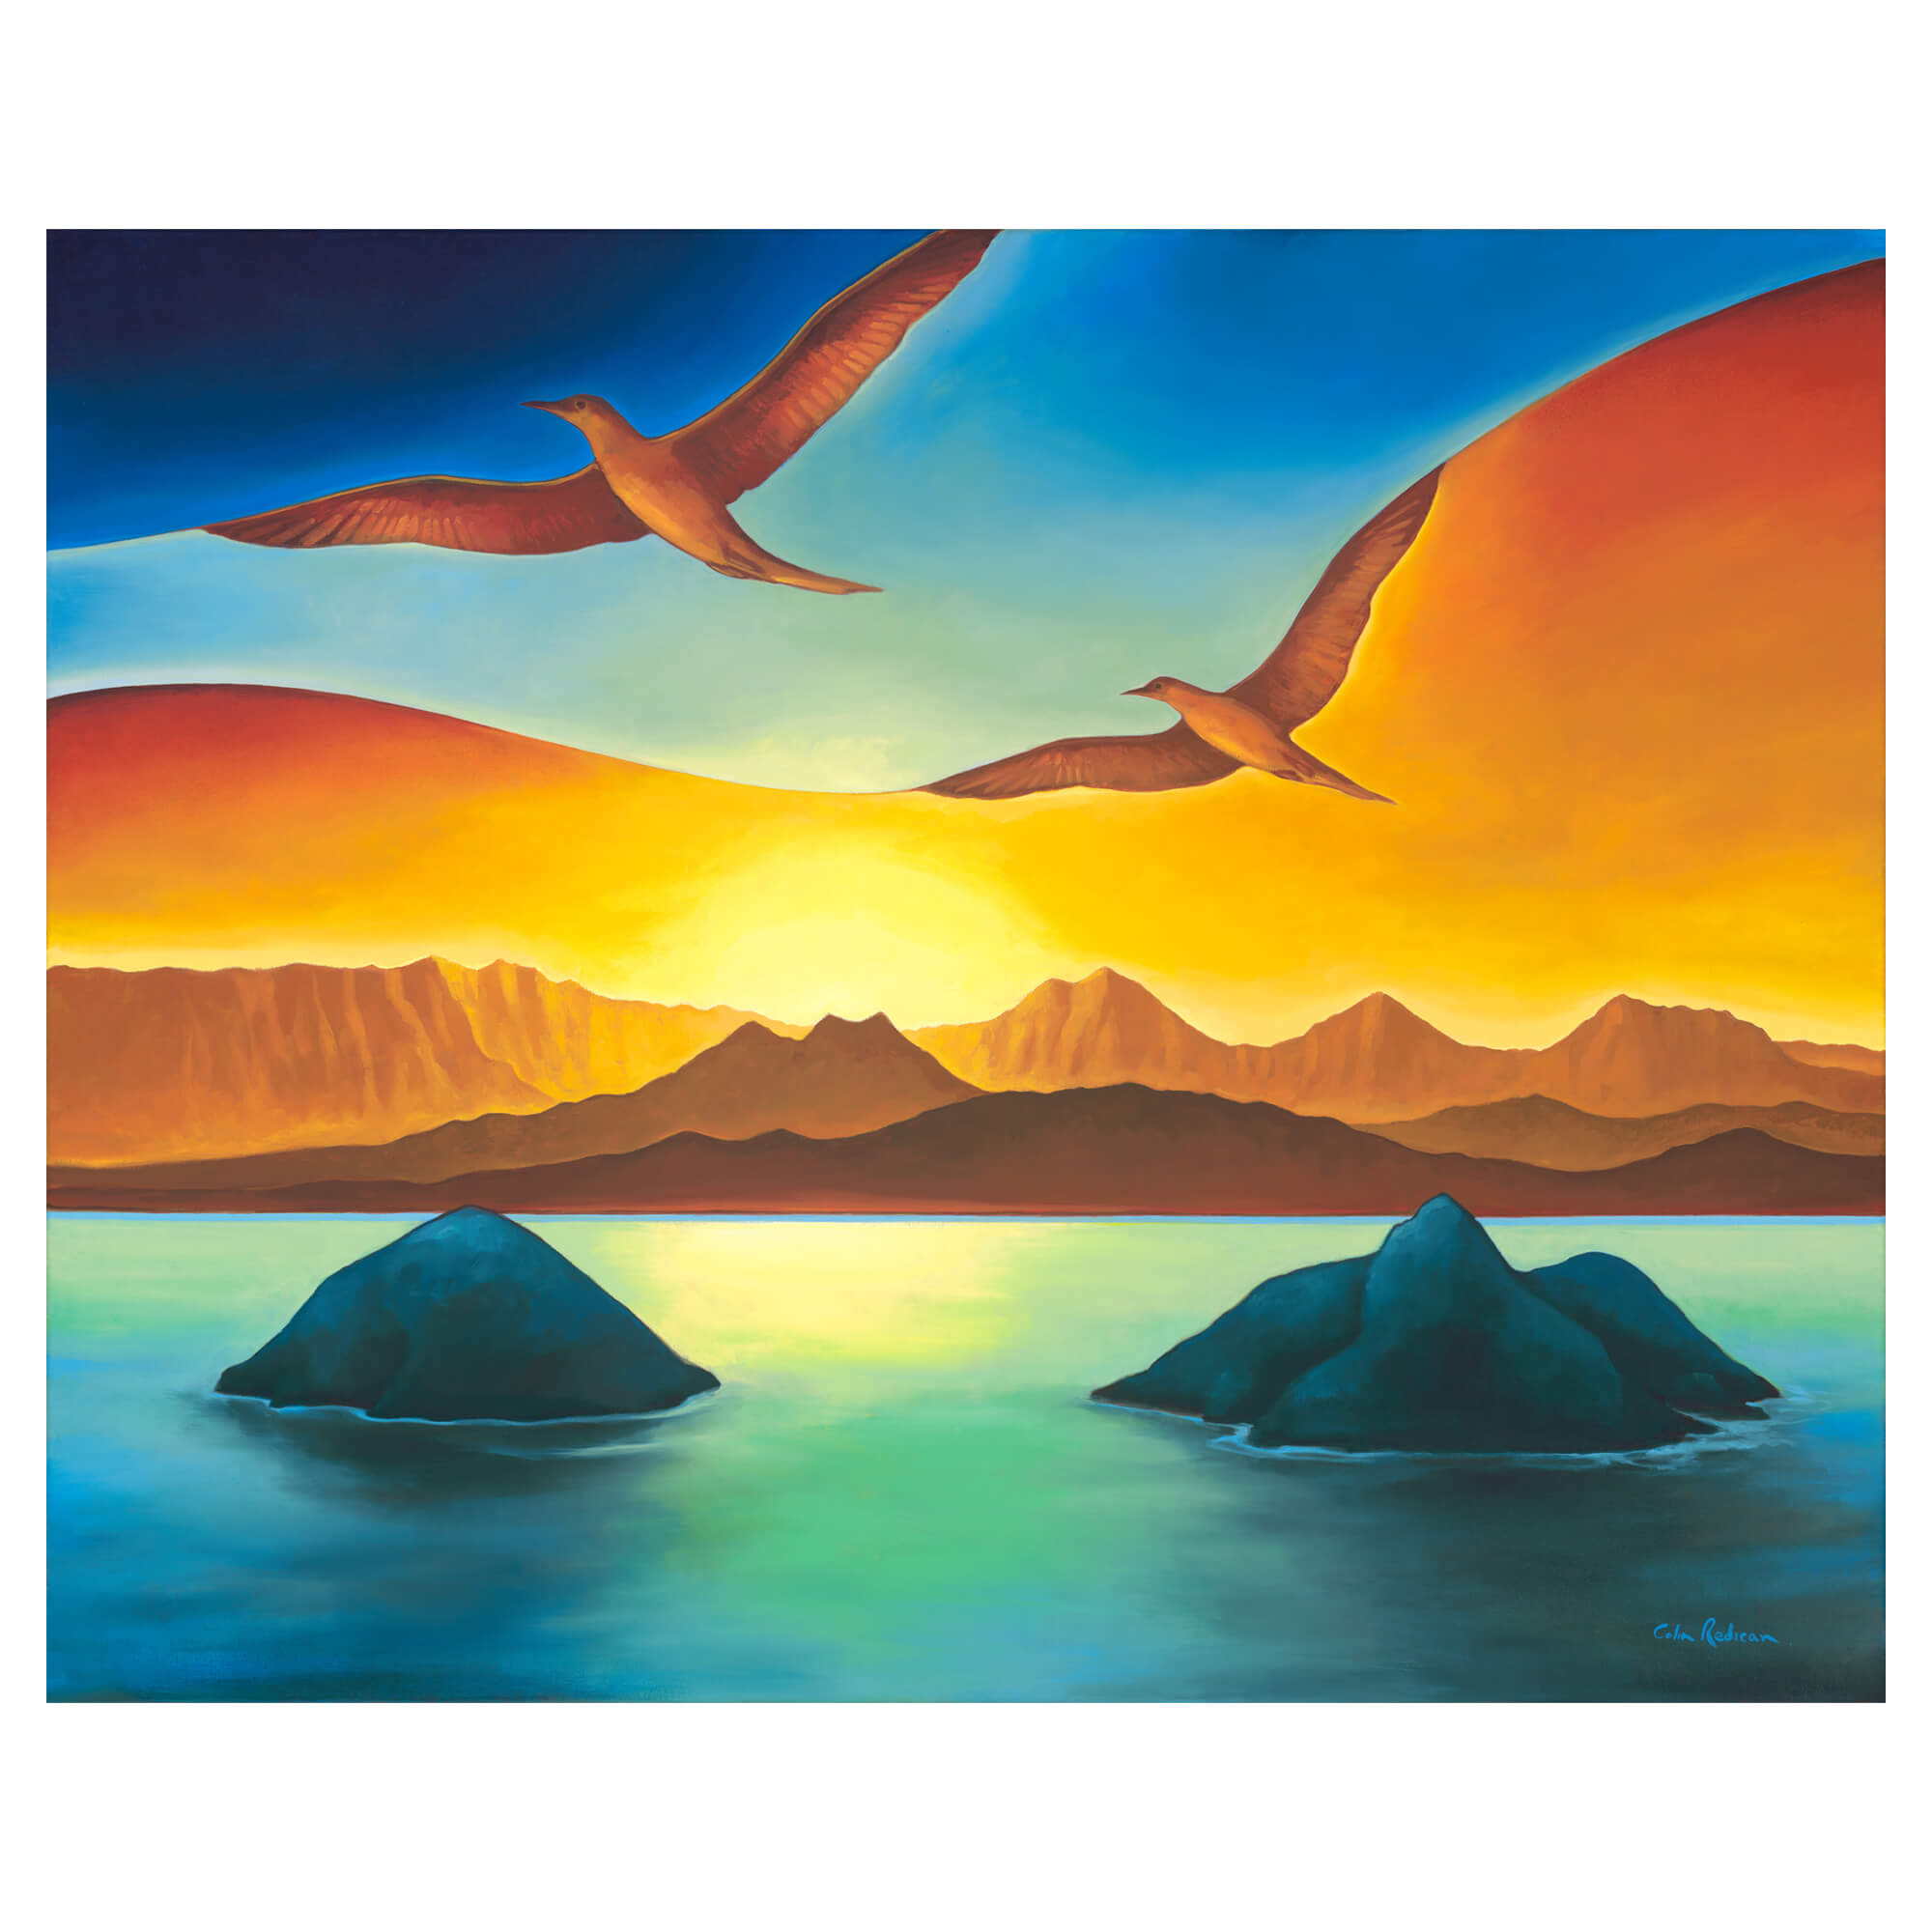 A large tropical island with some flying birds by Hawaii artist Colin Redican